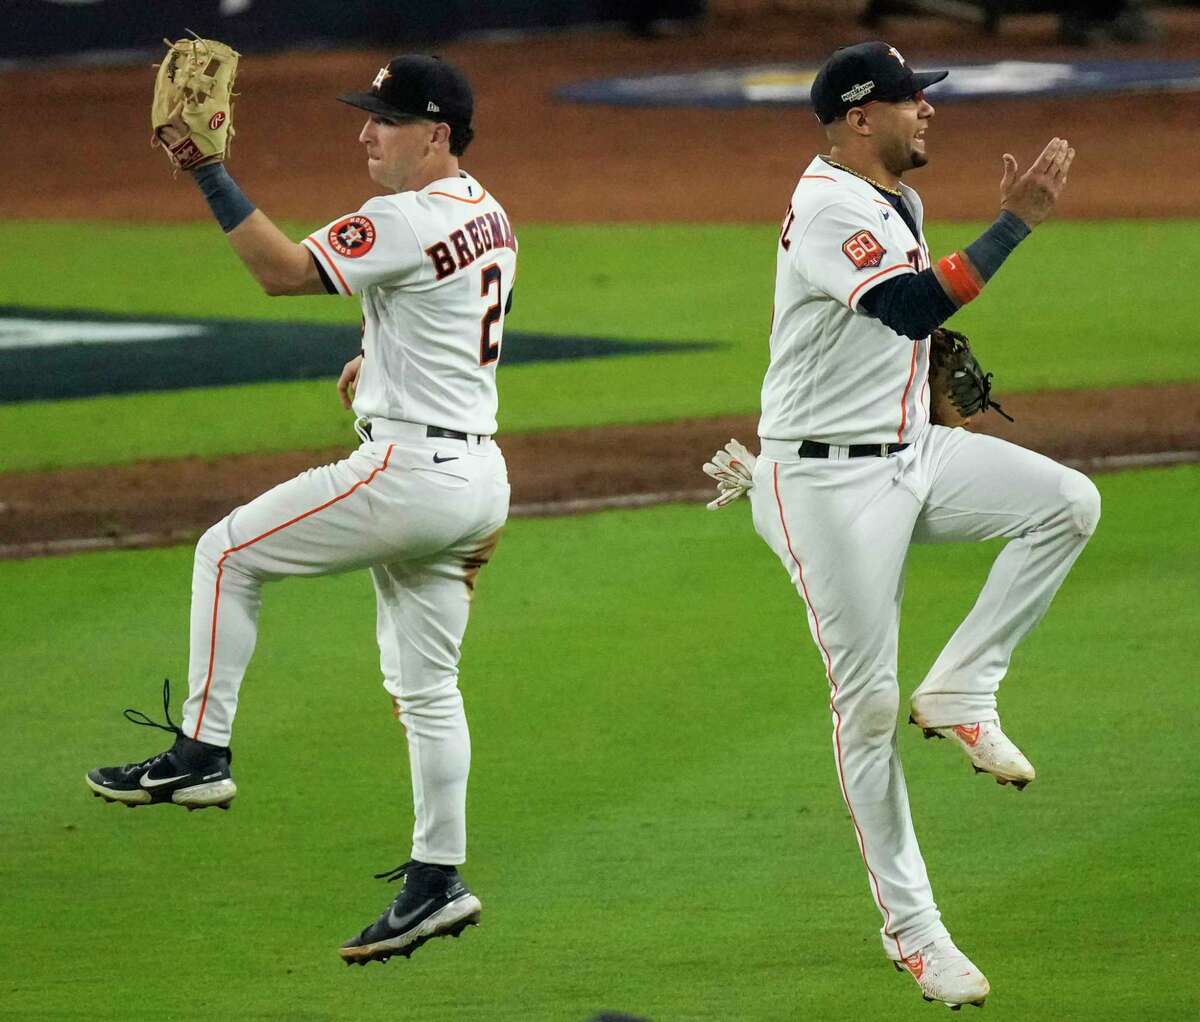 Houston Astros first baseman Yuli Gurriel (10) gives third baseman Alex Bregman (2) a high-five after defeating the New York Yankees 4-2 to win Game 1 of the American League Championship Series at Minute Maid Park on Wednesday, Oct. 19, 2022, in Houston.